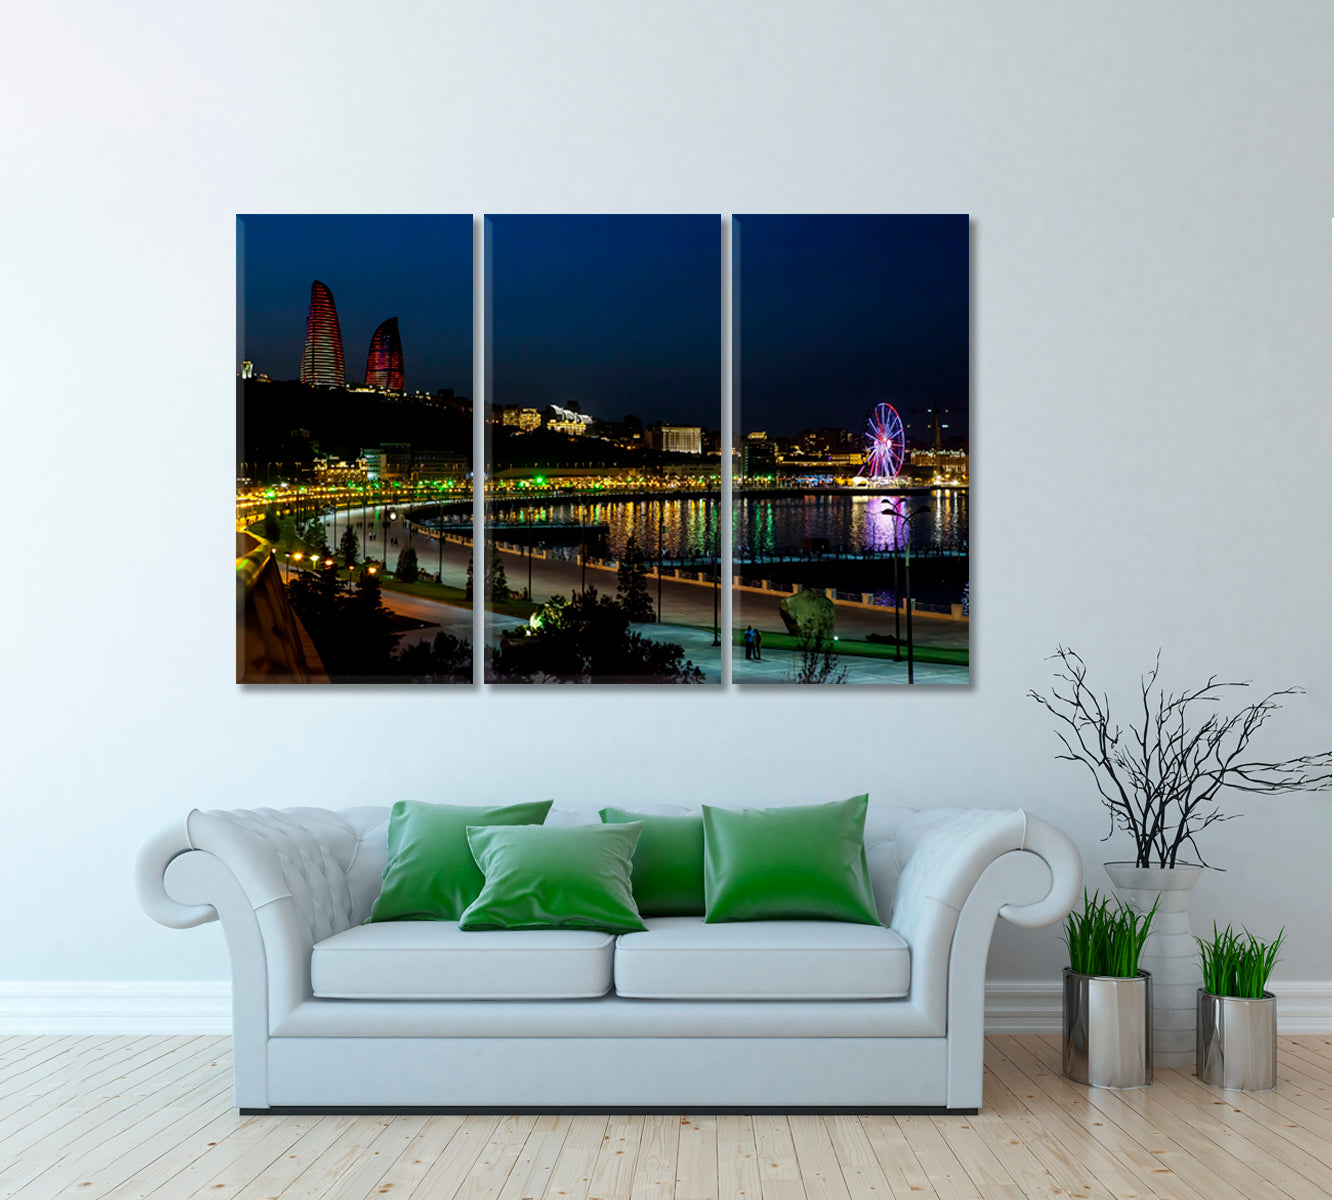 Baku Citiscape at Night Canvas Print ArtLexy 3 Panels 36"x24" inches 